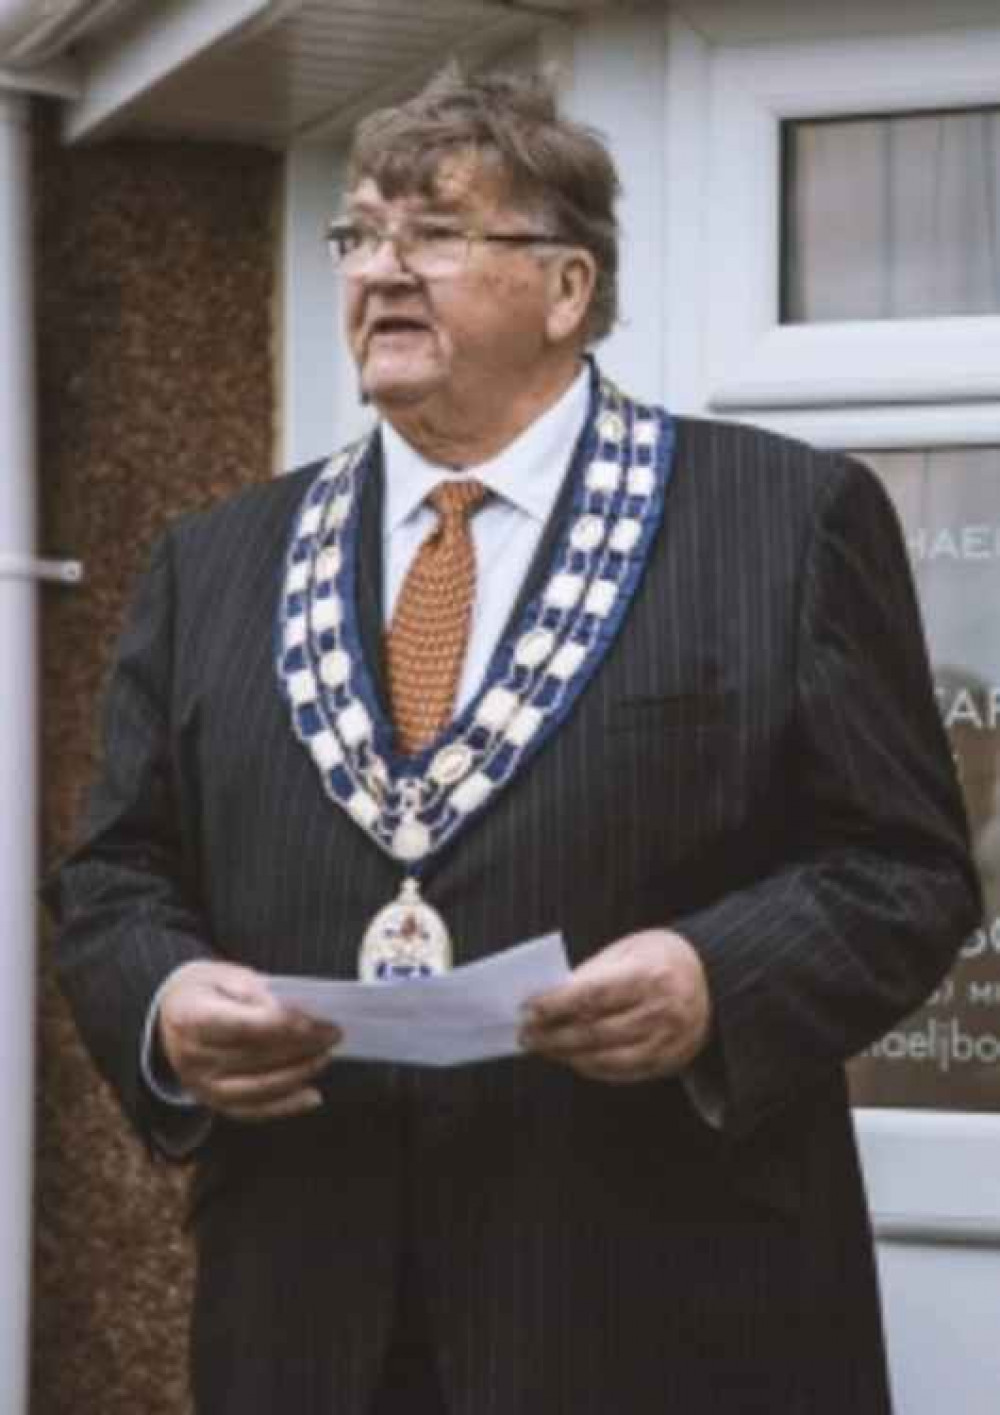 The Mayor of Seaton, Cllr Ken Beer, hoping to bring cheer to residents in 2021